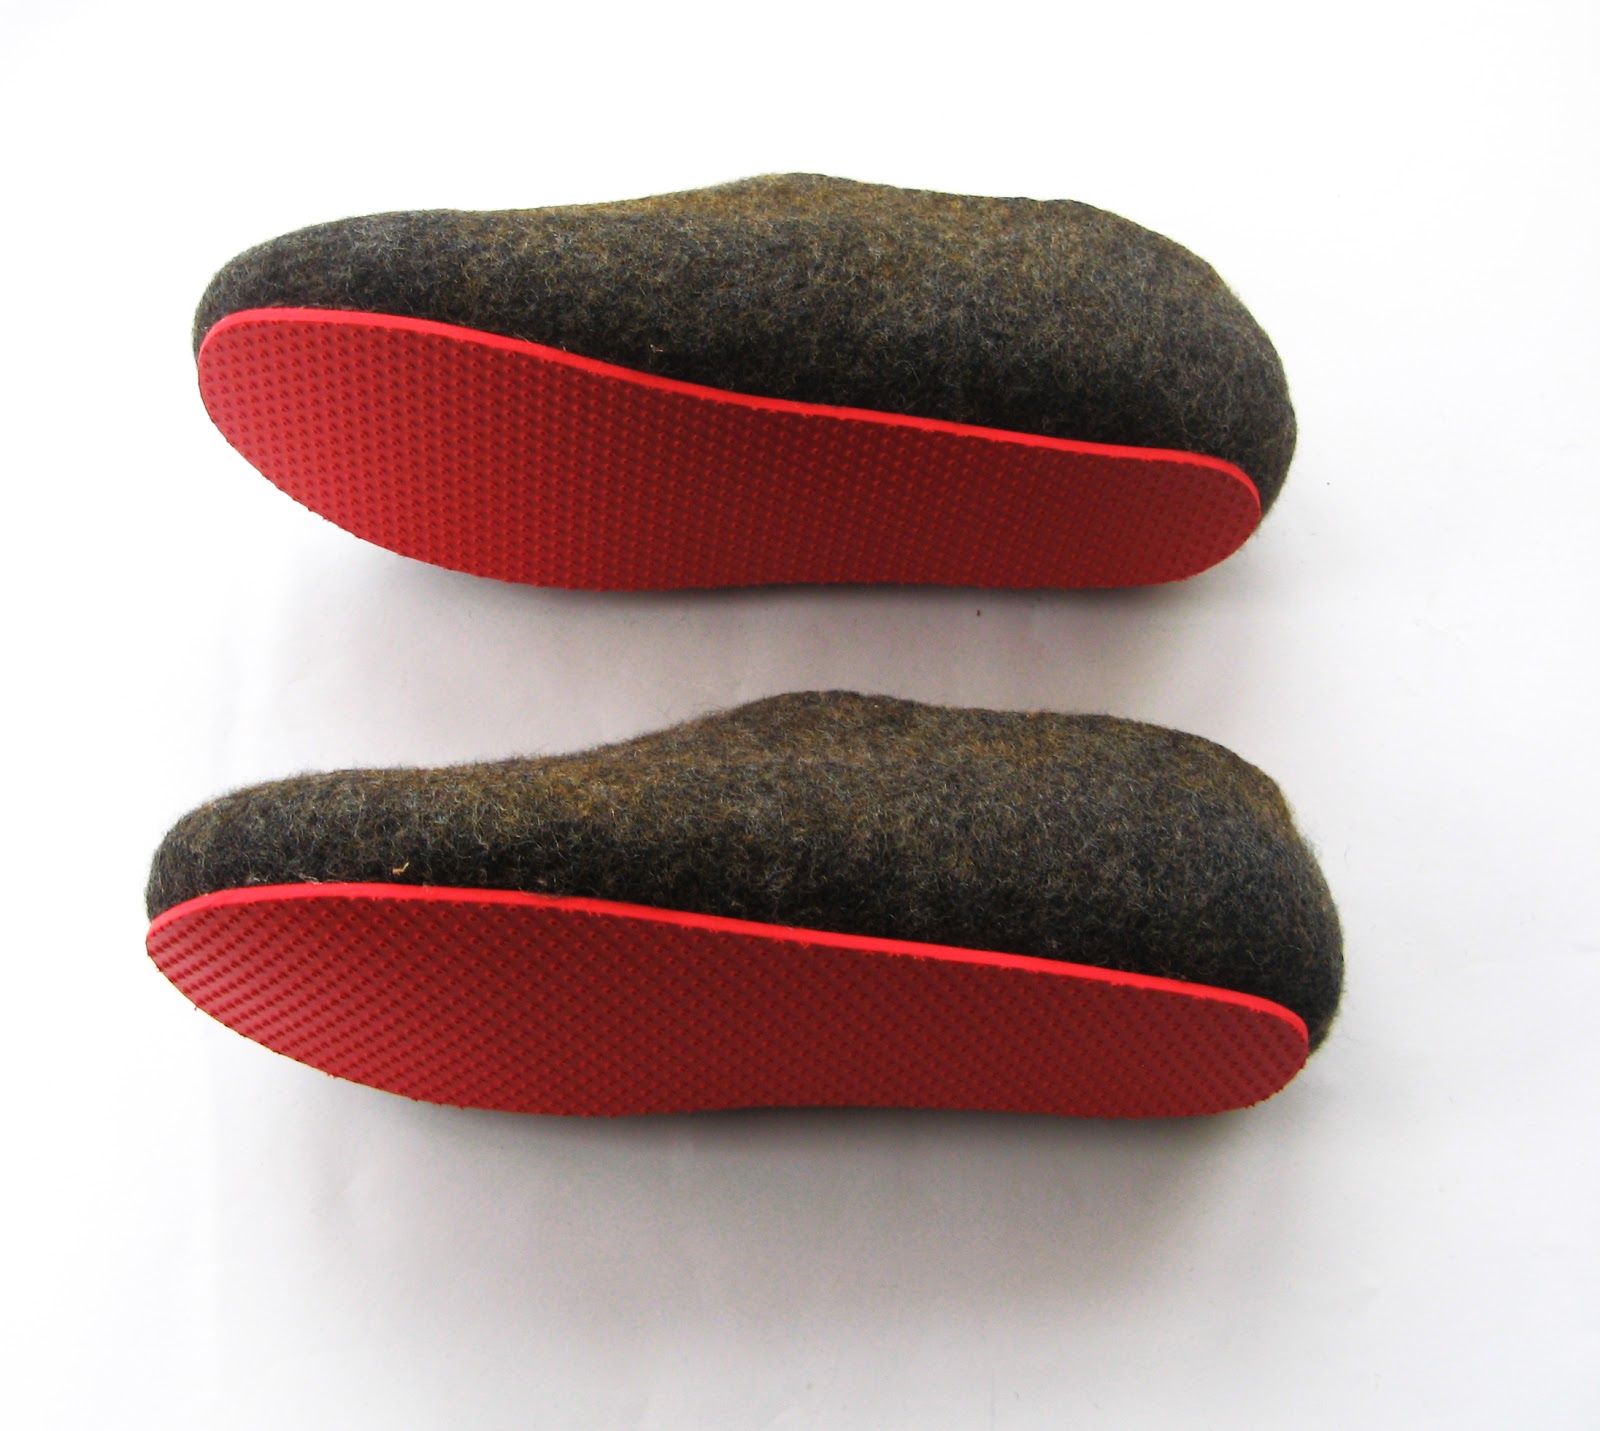 Felted Wool Slippers, Wool Boots, Cat Beds: 04/03/12 - 11/03/12